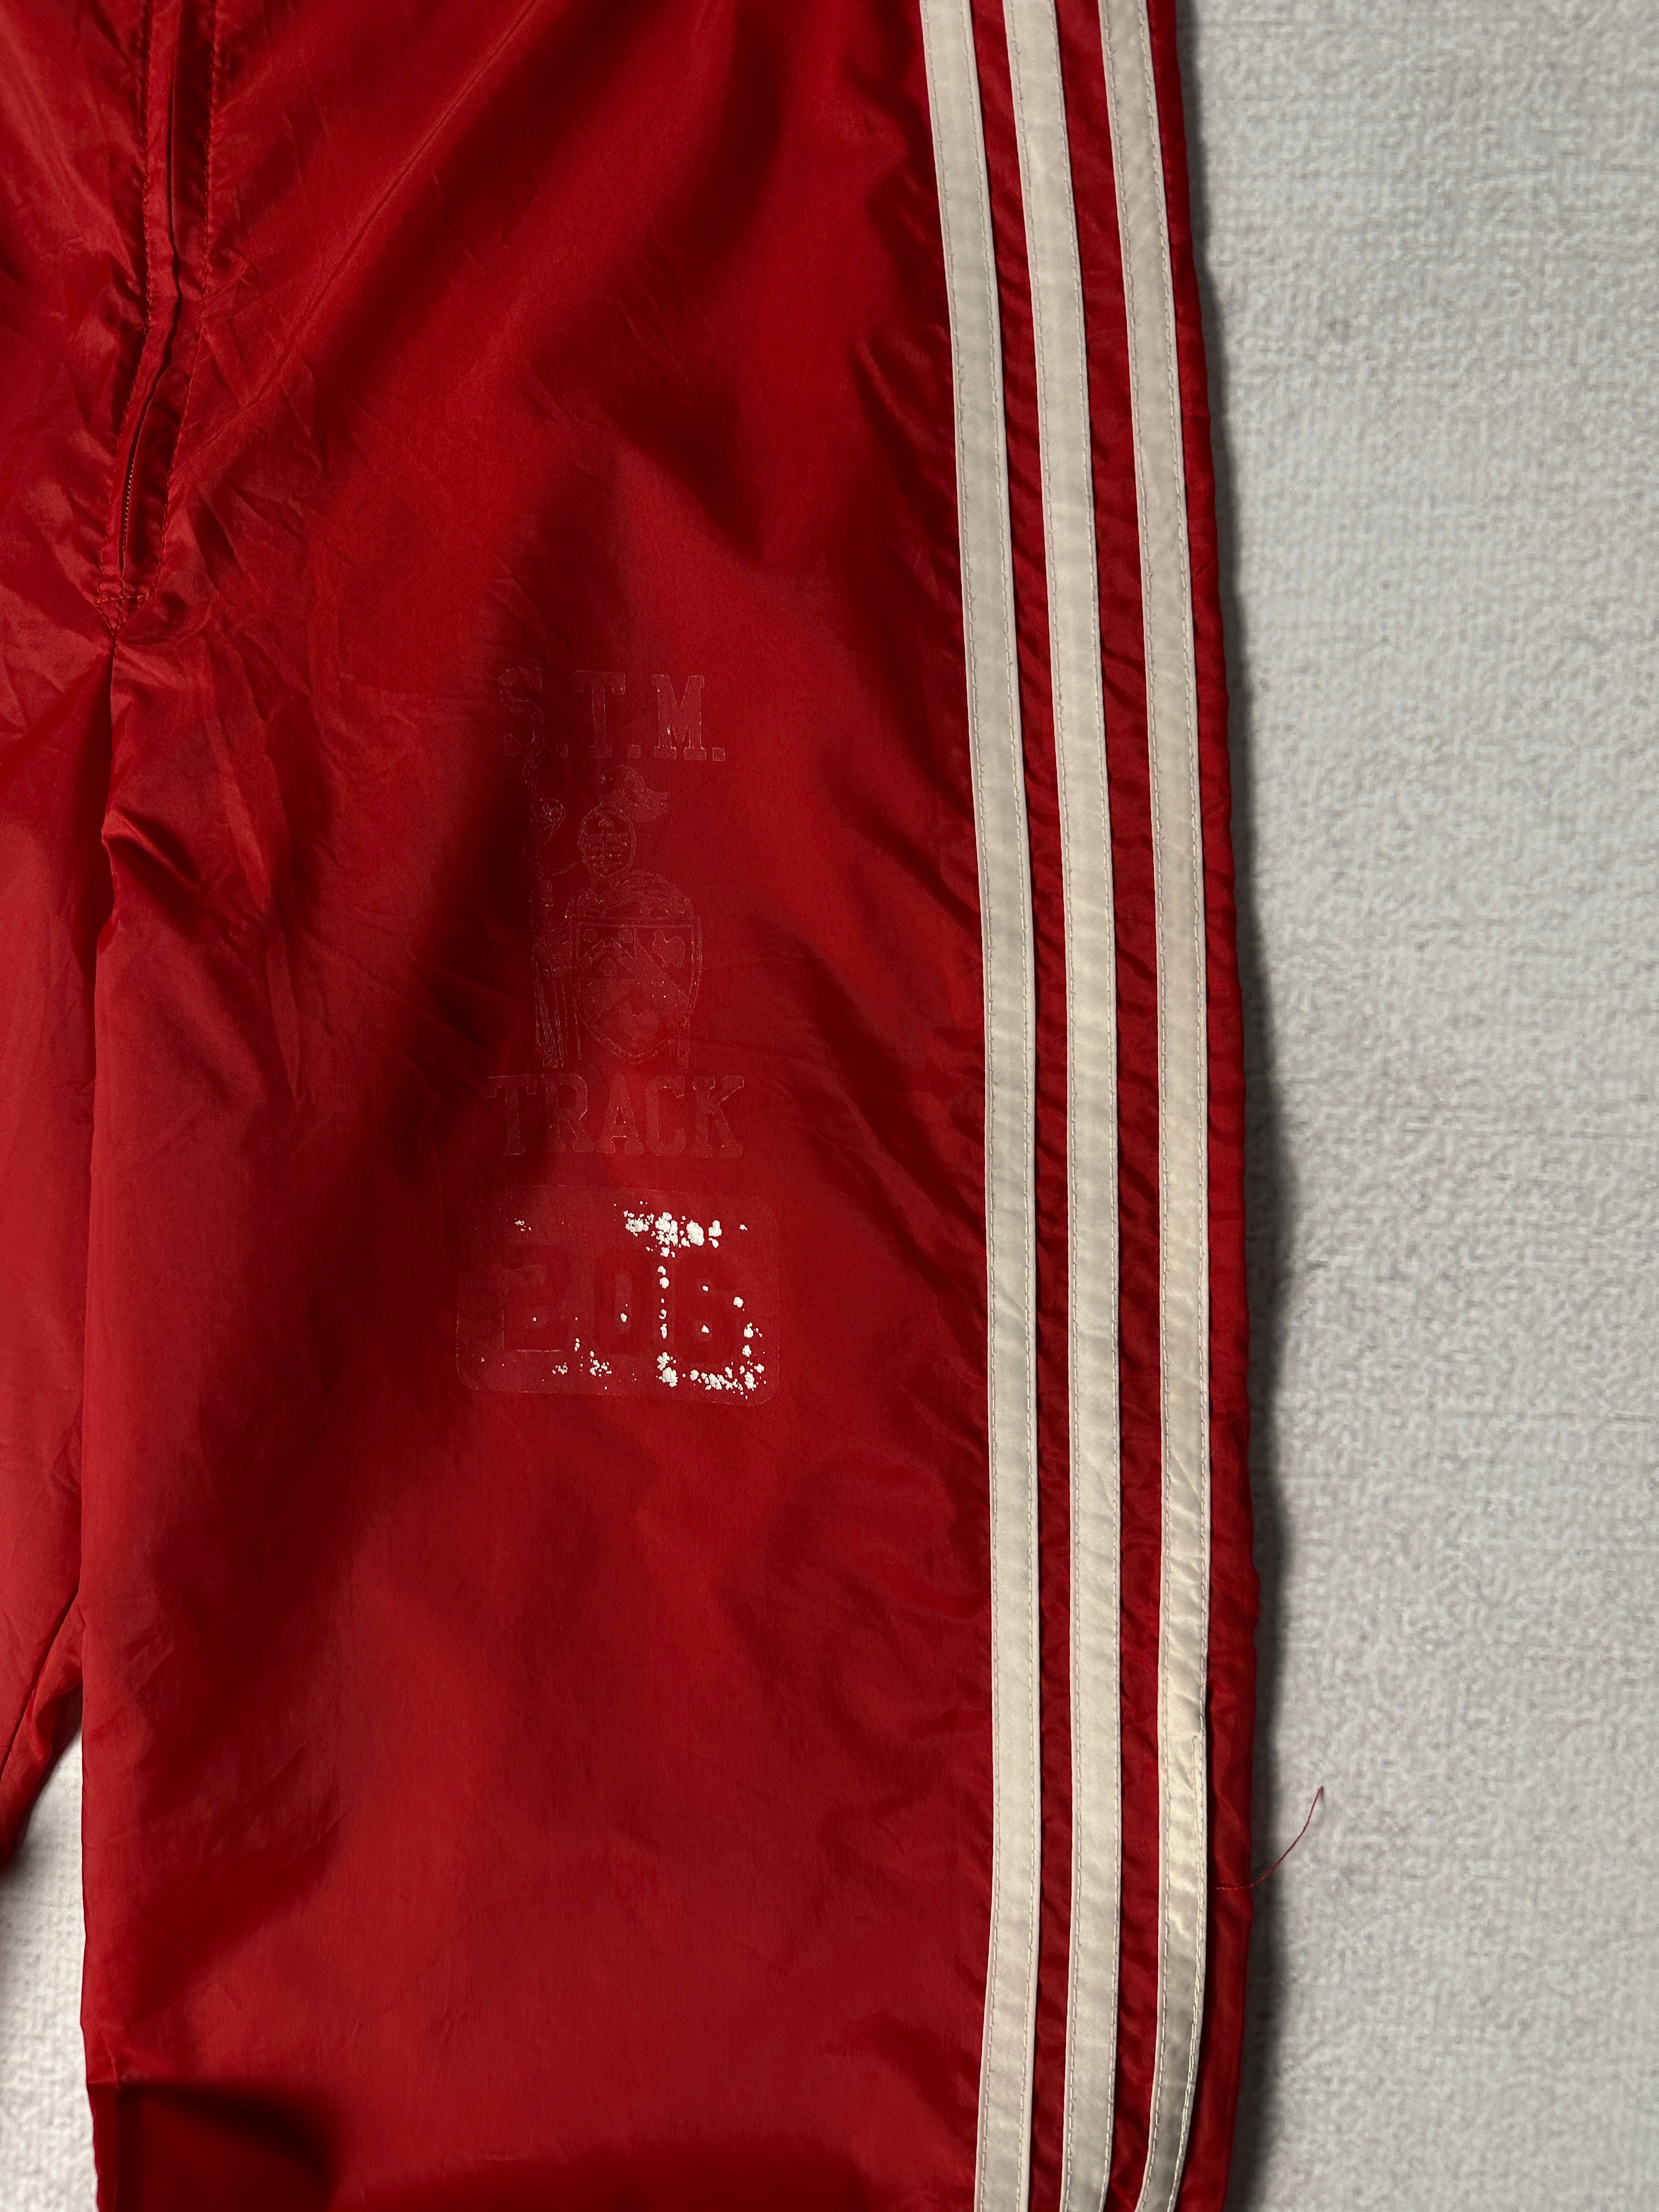 Vintage 80s Adidas Track Pants - Men's Small